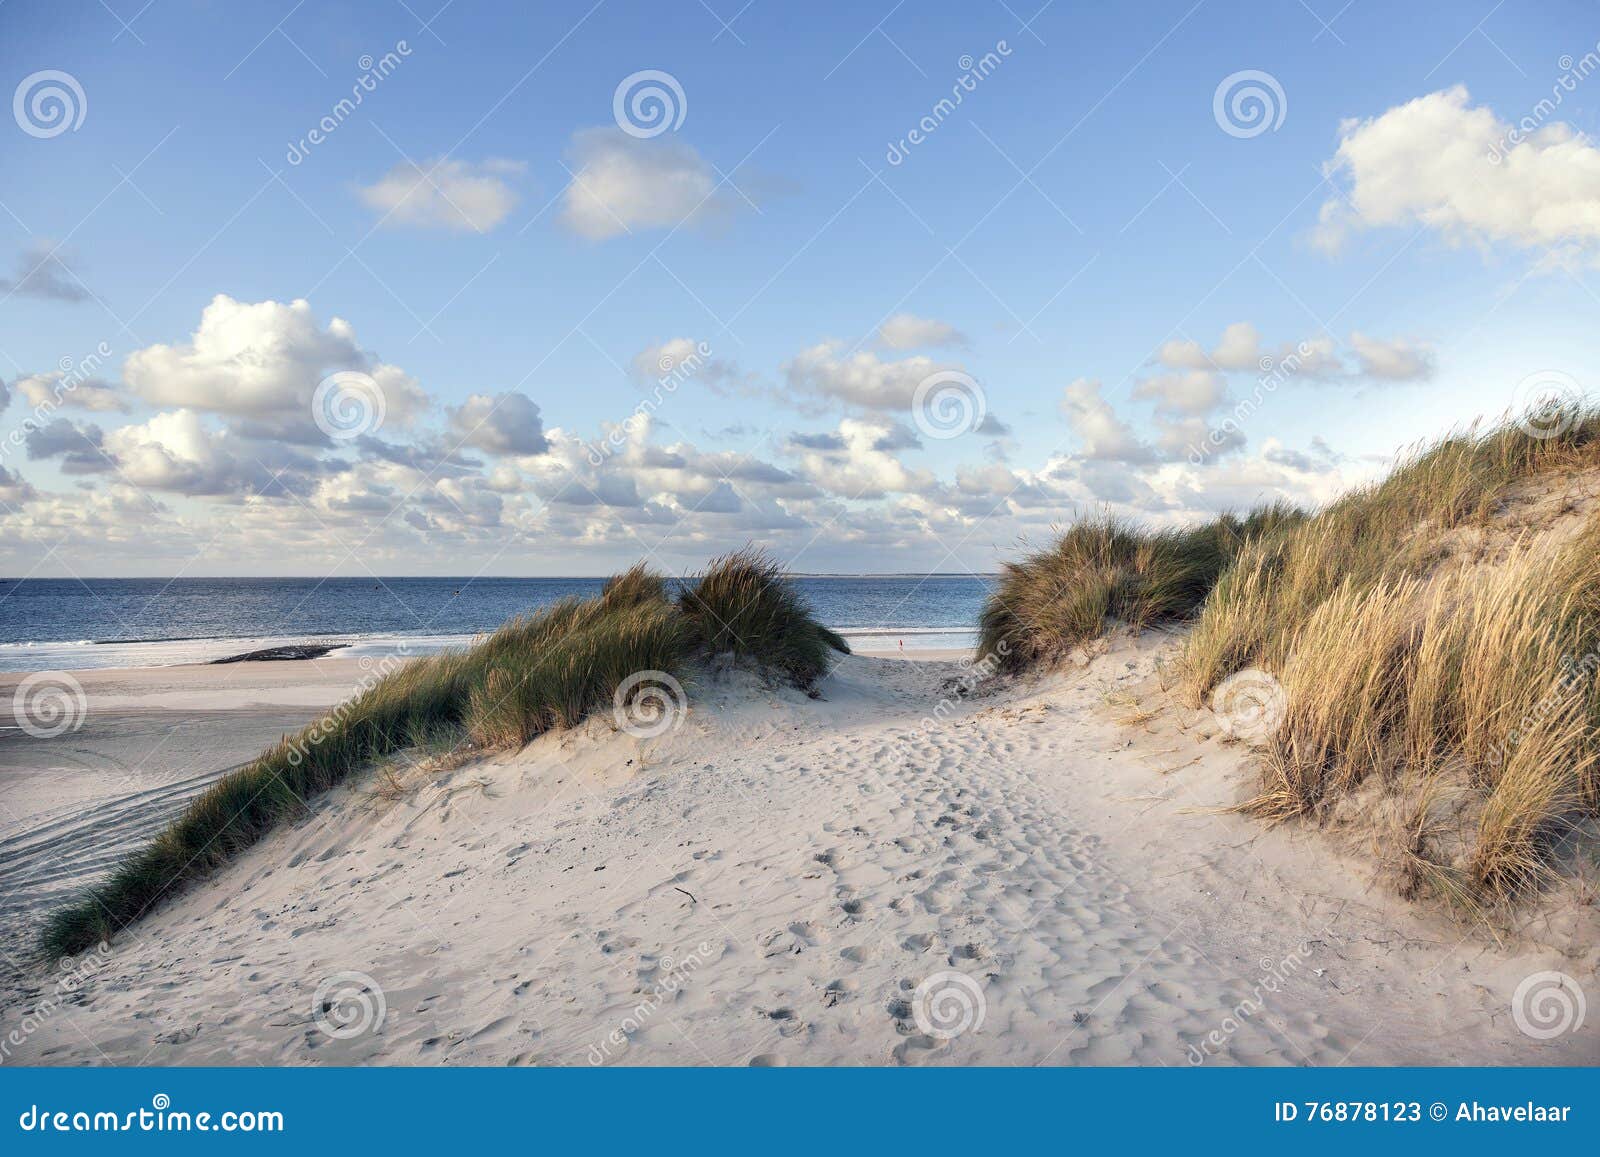 sand and dunes near beach of vlieland in the netherlands with bl